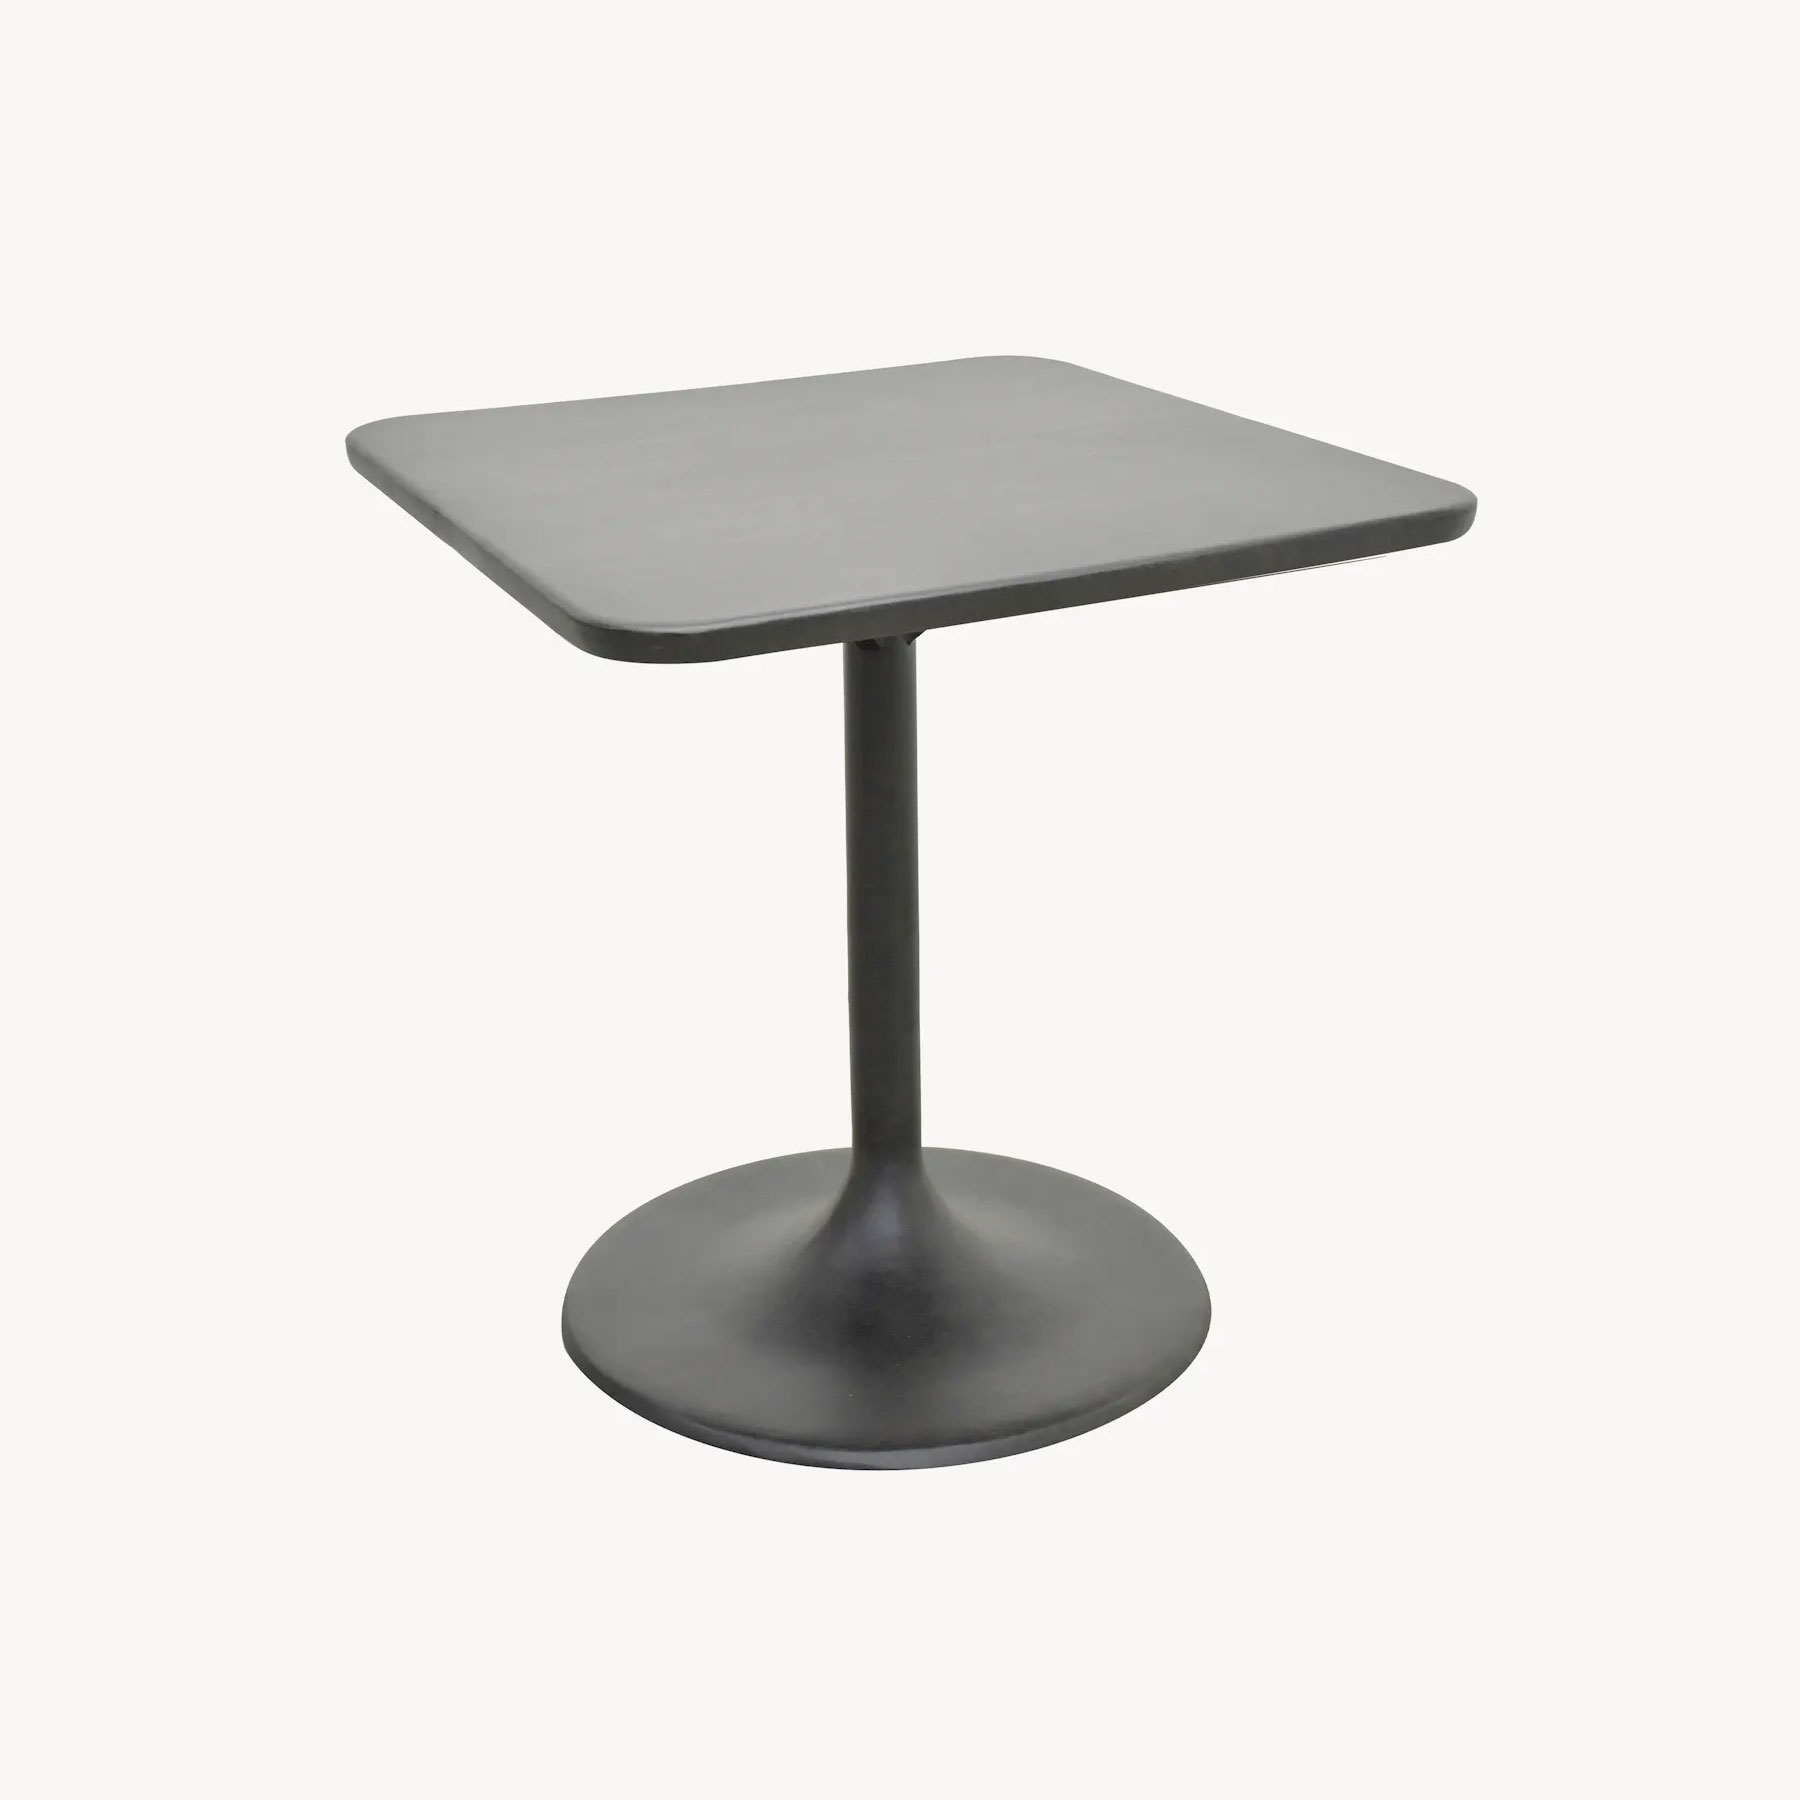 Castelle Tulip 30 inch Square Bar Height Table